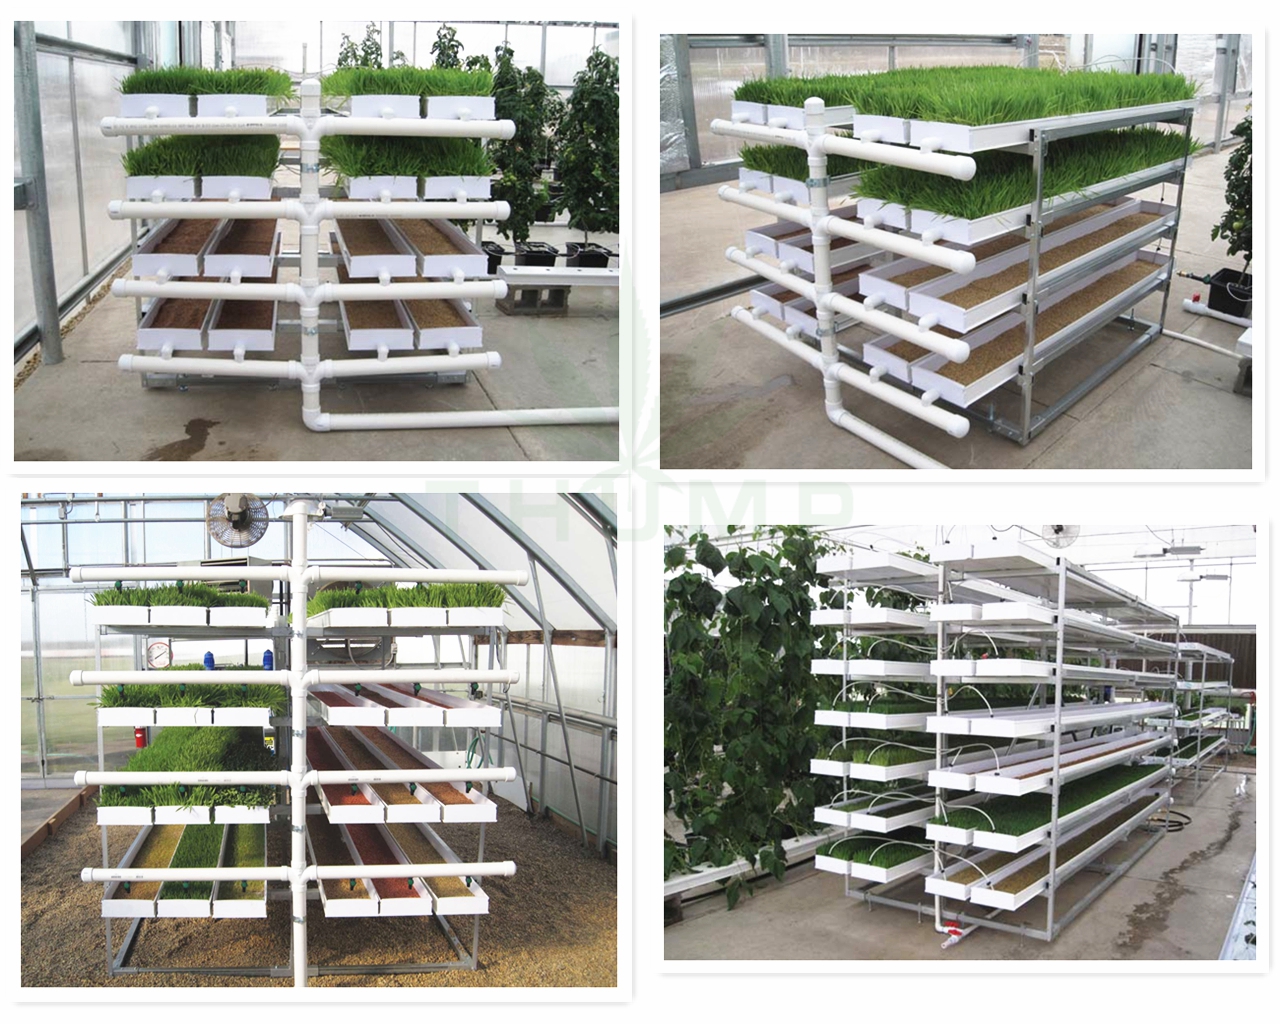 Hydroponic Barley Fodder Container System Growing Systems